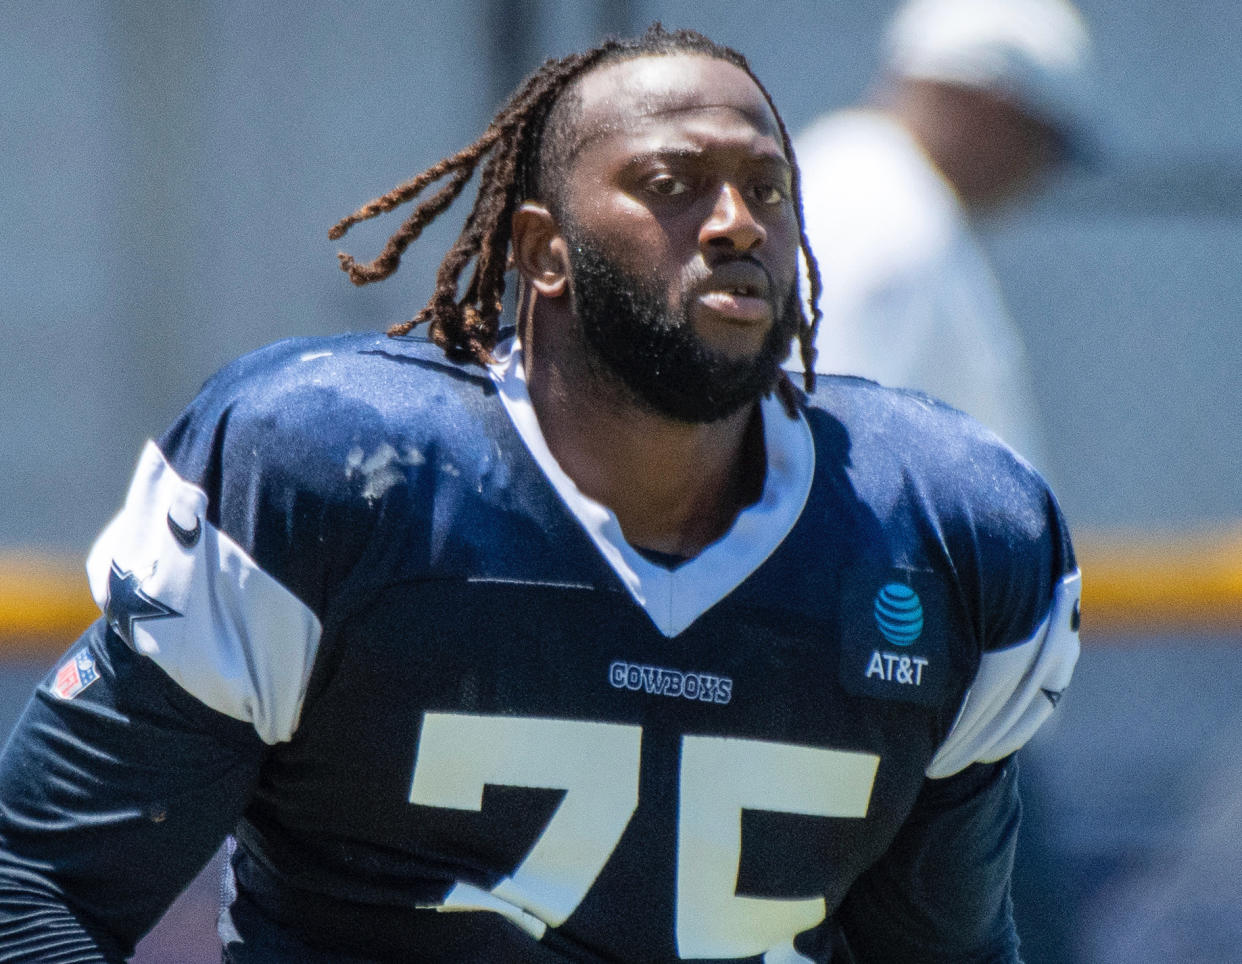 Dallas Cowboys defensive tackle Osa Odighizuwa in action at practice at the NFL football team's training camp in Oxnard, Calif., Wednesday, July 28, 2021. (AP Photo/Michael Owen Baker)